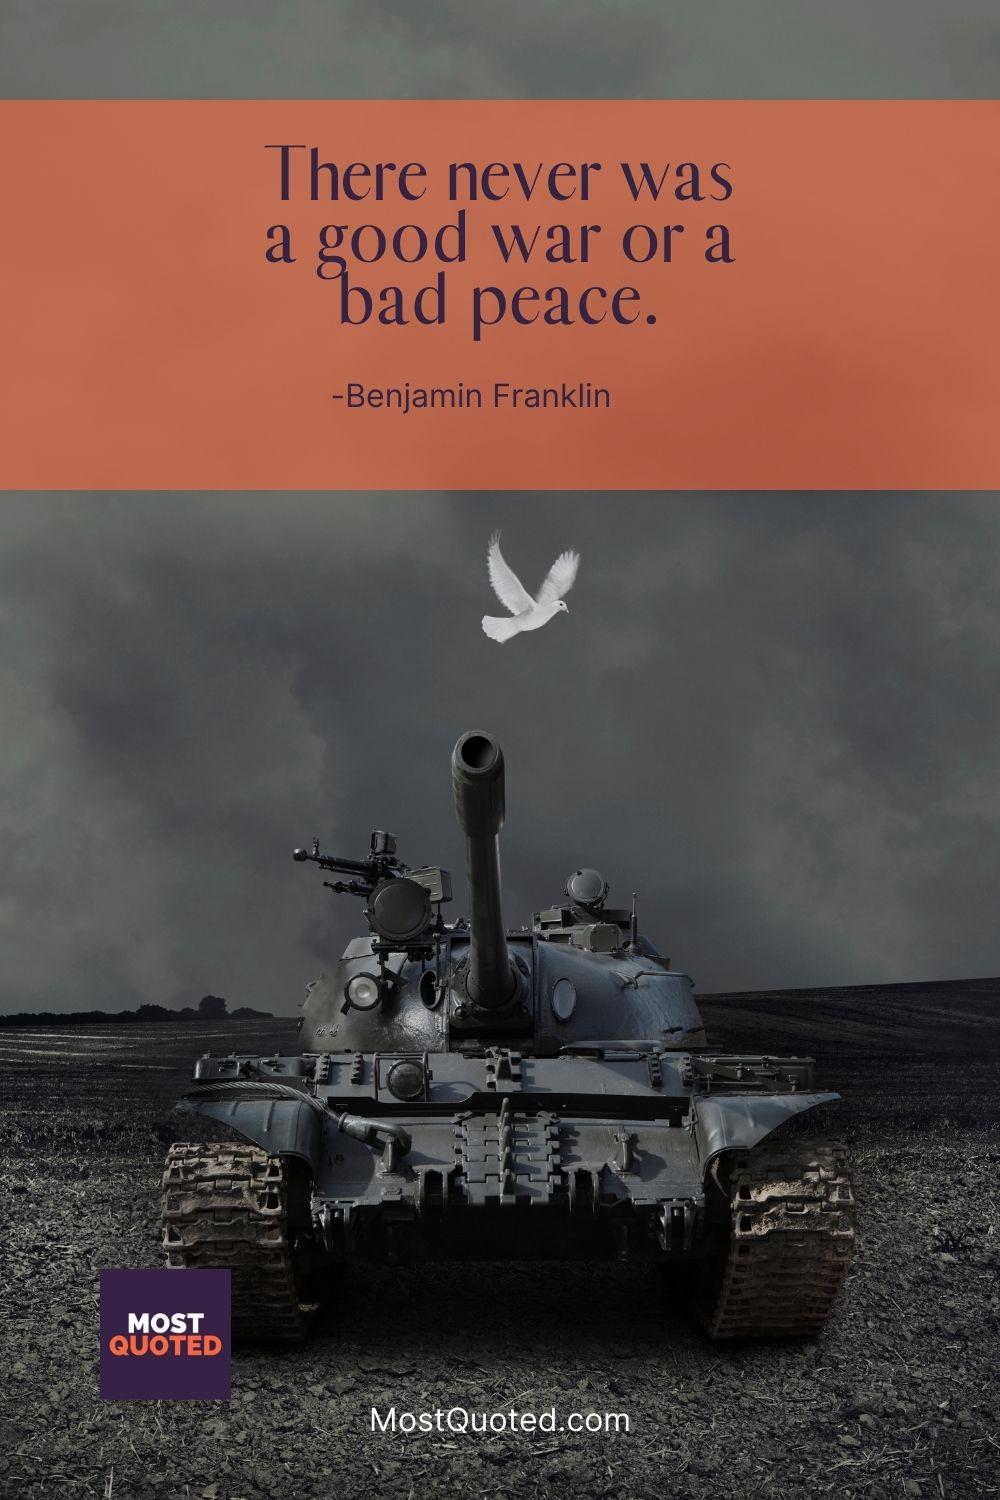 There never was a good war or a bad peace. - Benjamin Franklin